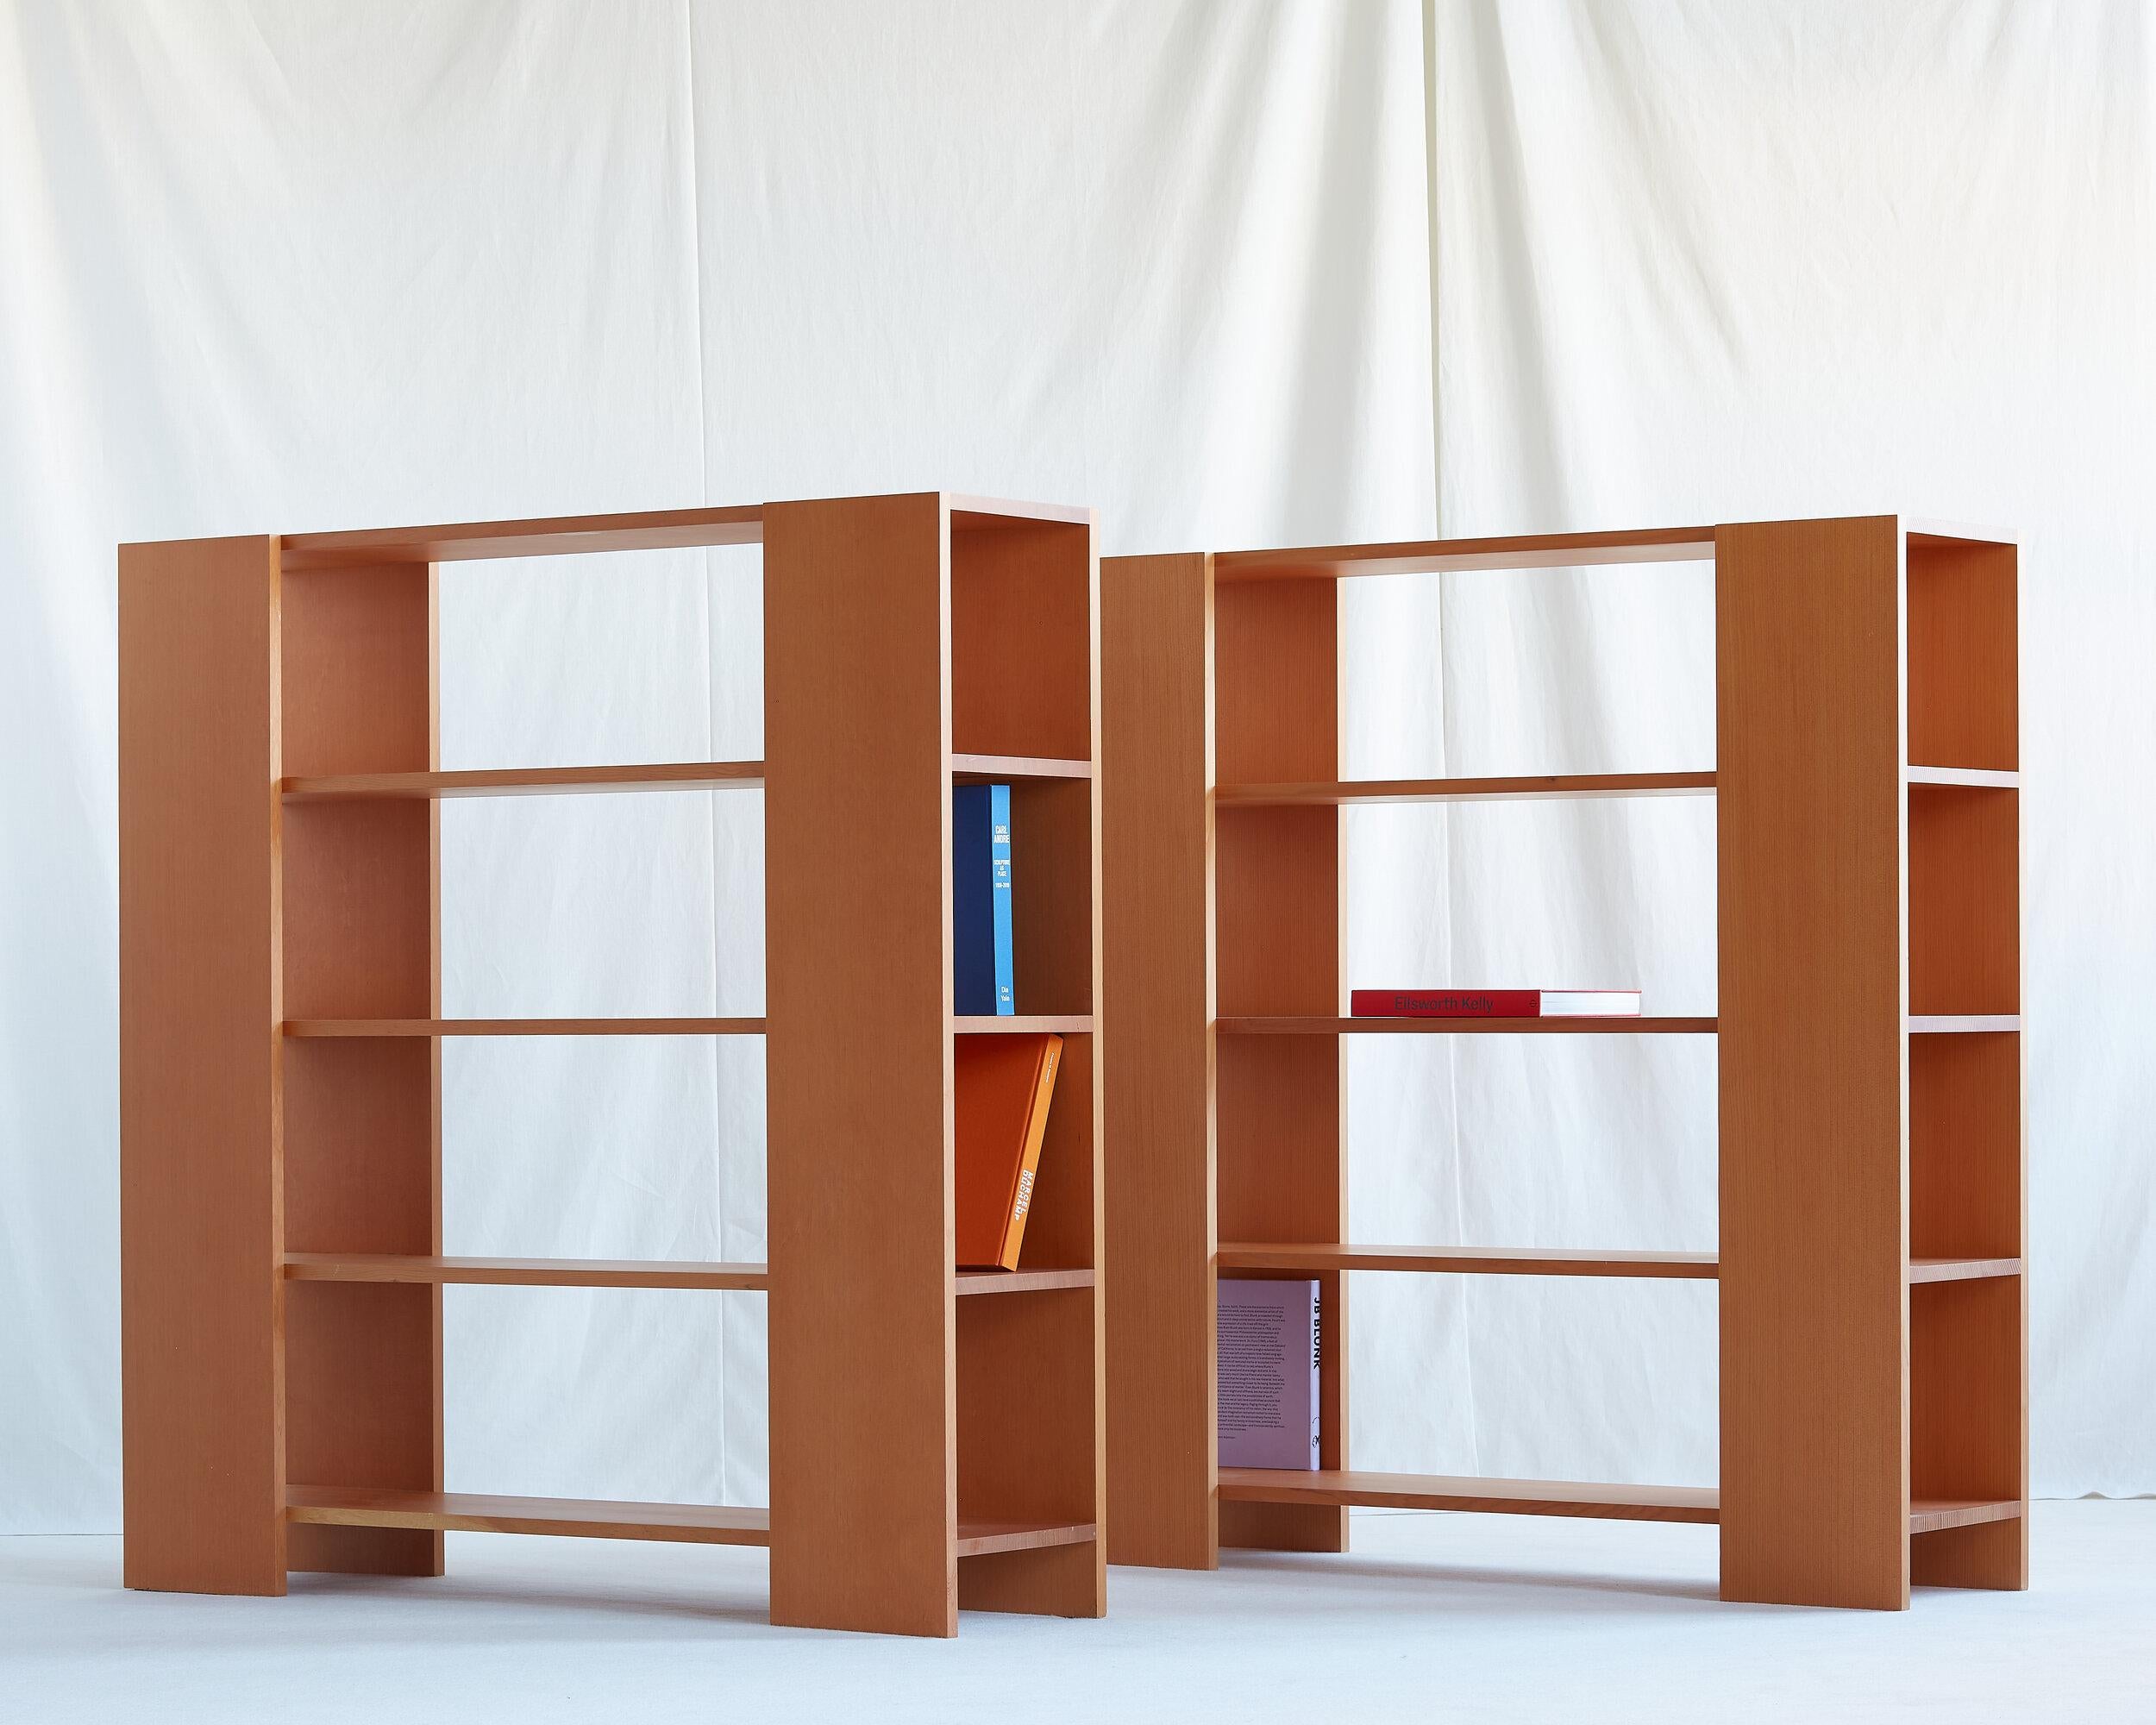 Pair of Donald Judd bookshelves in solid douglas fir. 

Model no. 34. Designed in 1983. 

Impressed Donald Judd USA PSF, numbered 34, 100 and 34, 101. 
Both dated 2007. 

Solid individually or as a pair.